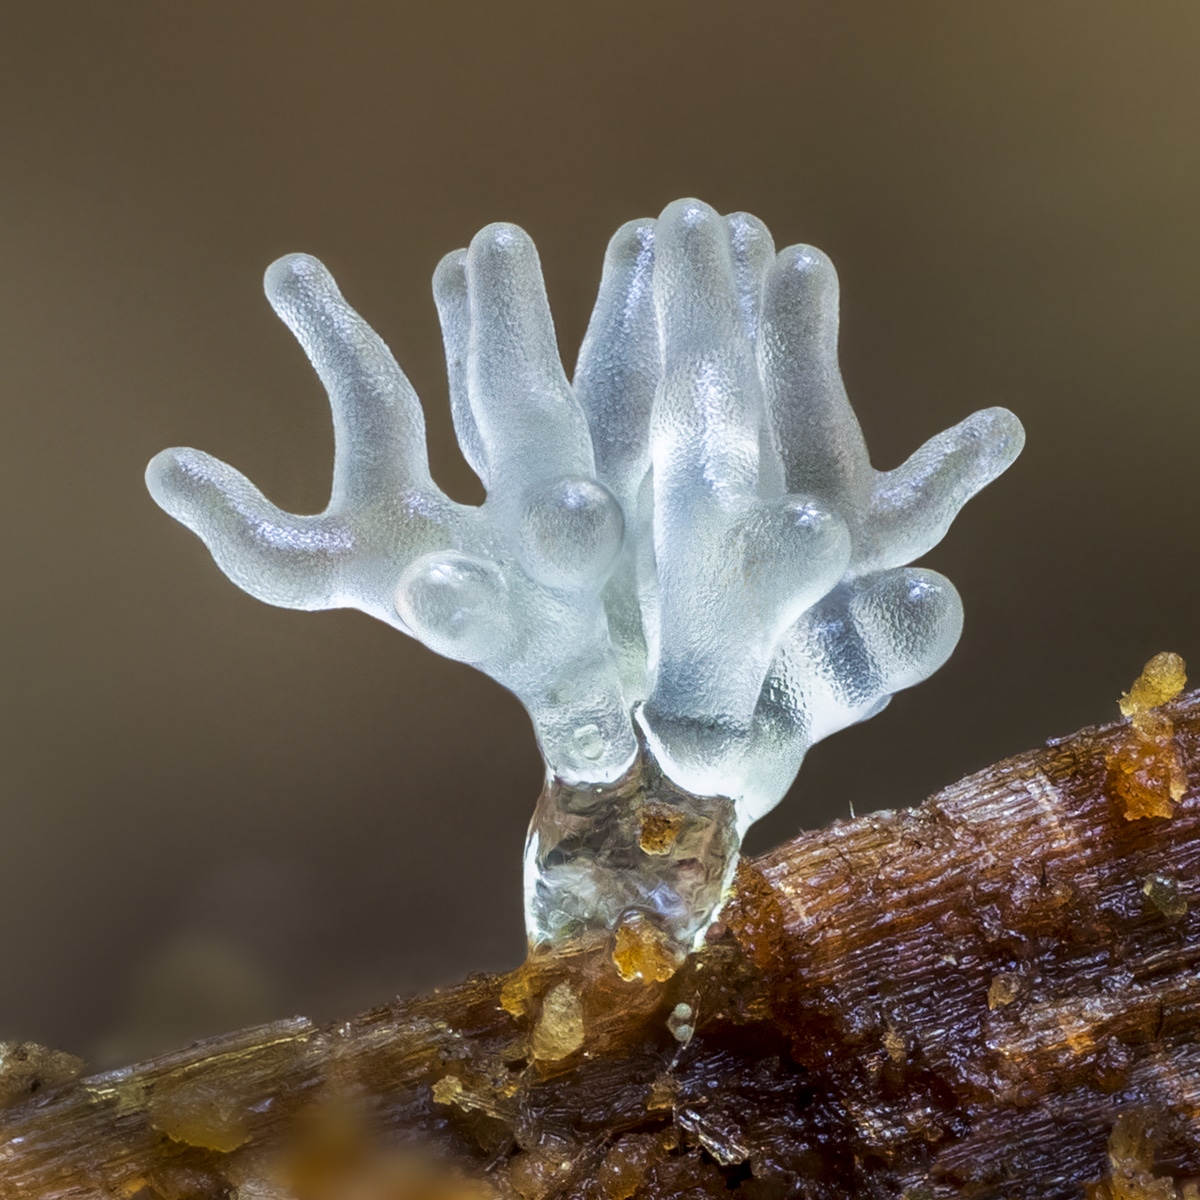 barry-webb-slime-mould-ceratiomyxa-fruticulosa-coral-slime-mould